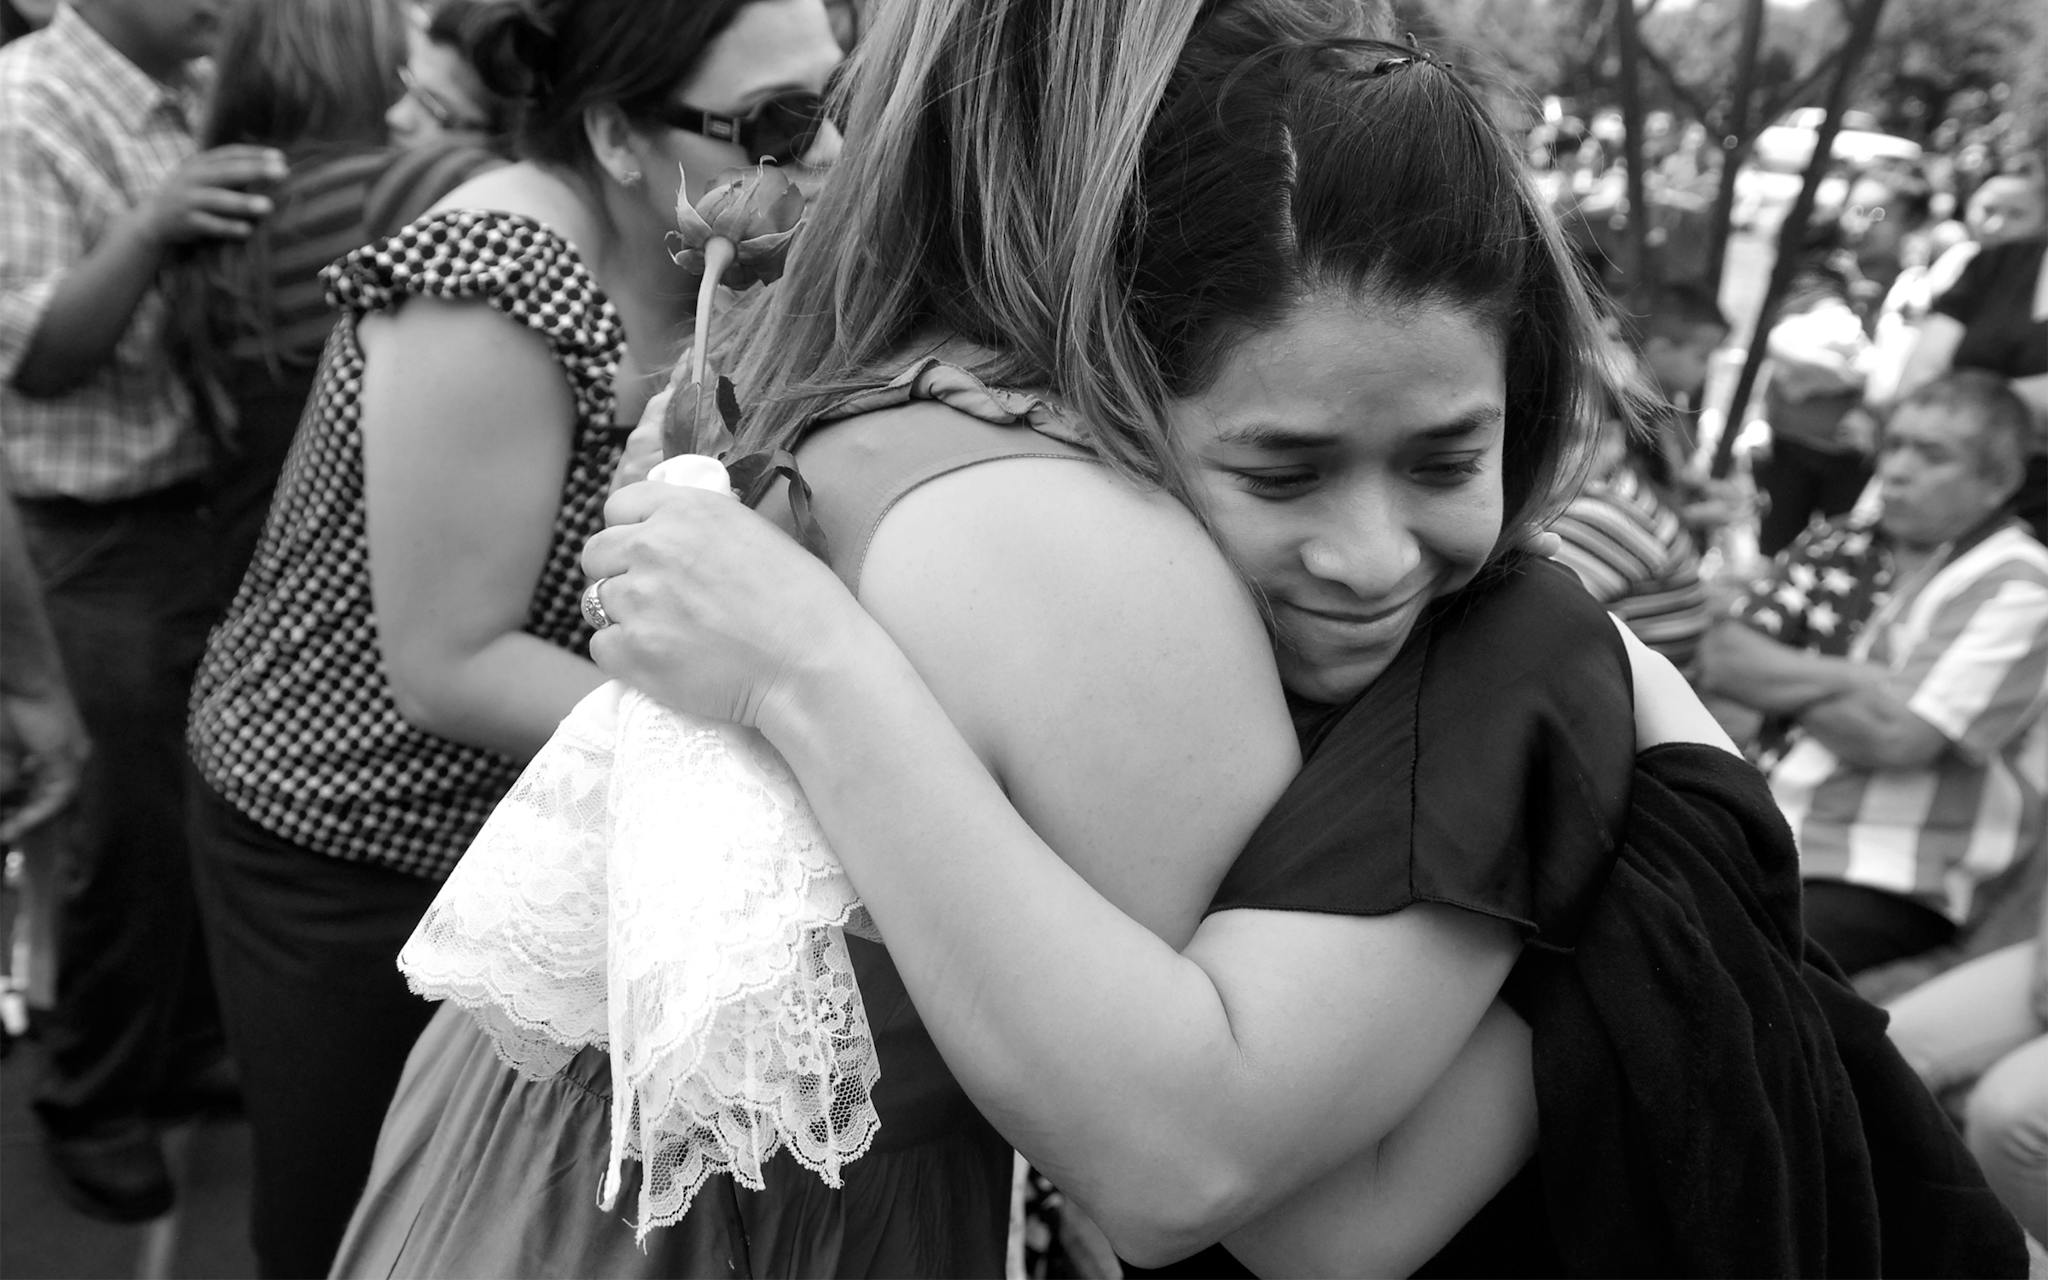 Maricela receiving a hug from Amy McMillan, a counselor at Christian’s middle school and a close friend of the family, at the graveside service on April 24, 2010.